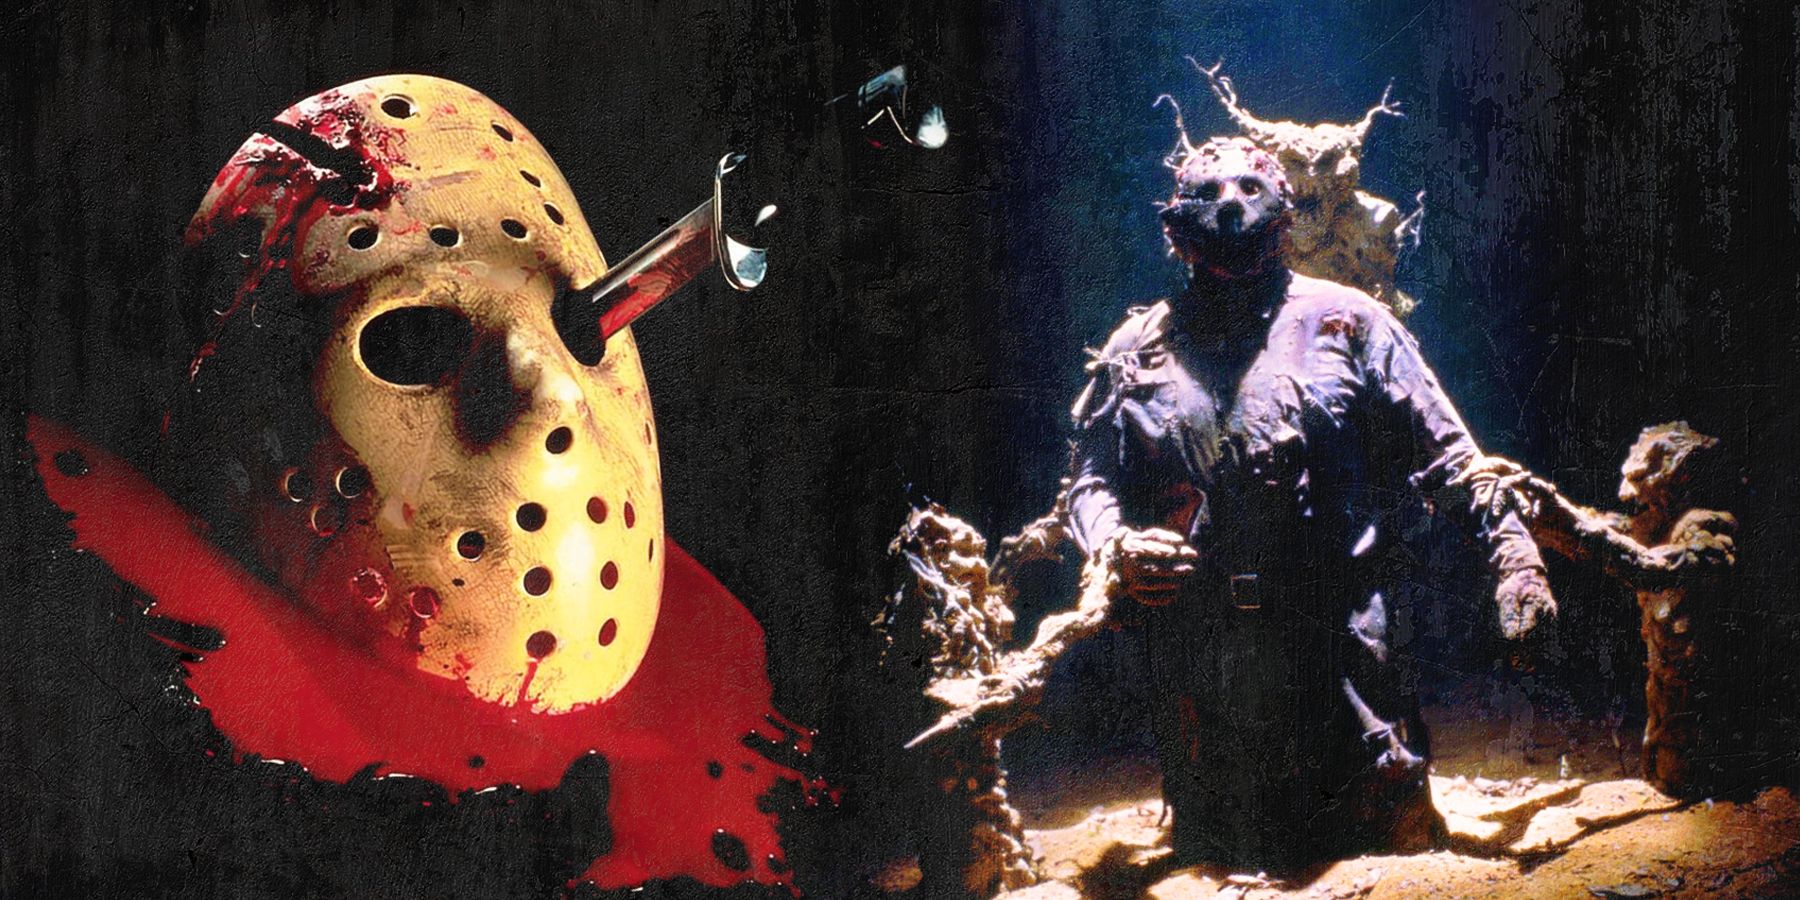 How to Watch Every Single Film in the Friday the 13th Franchise in